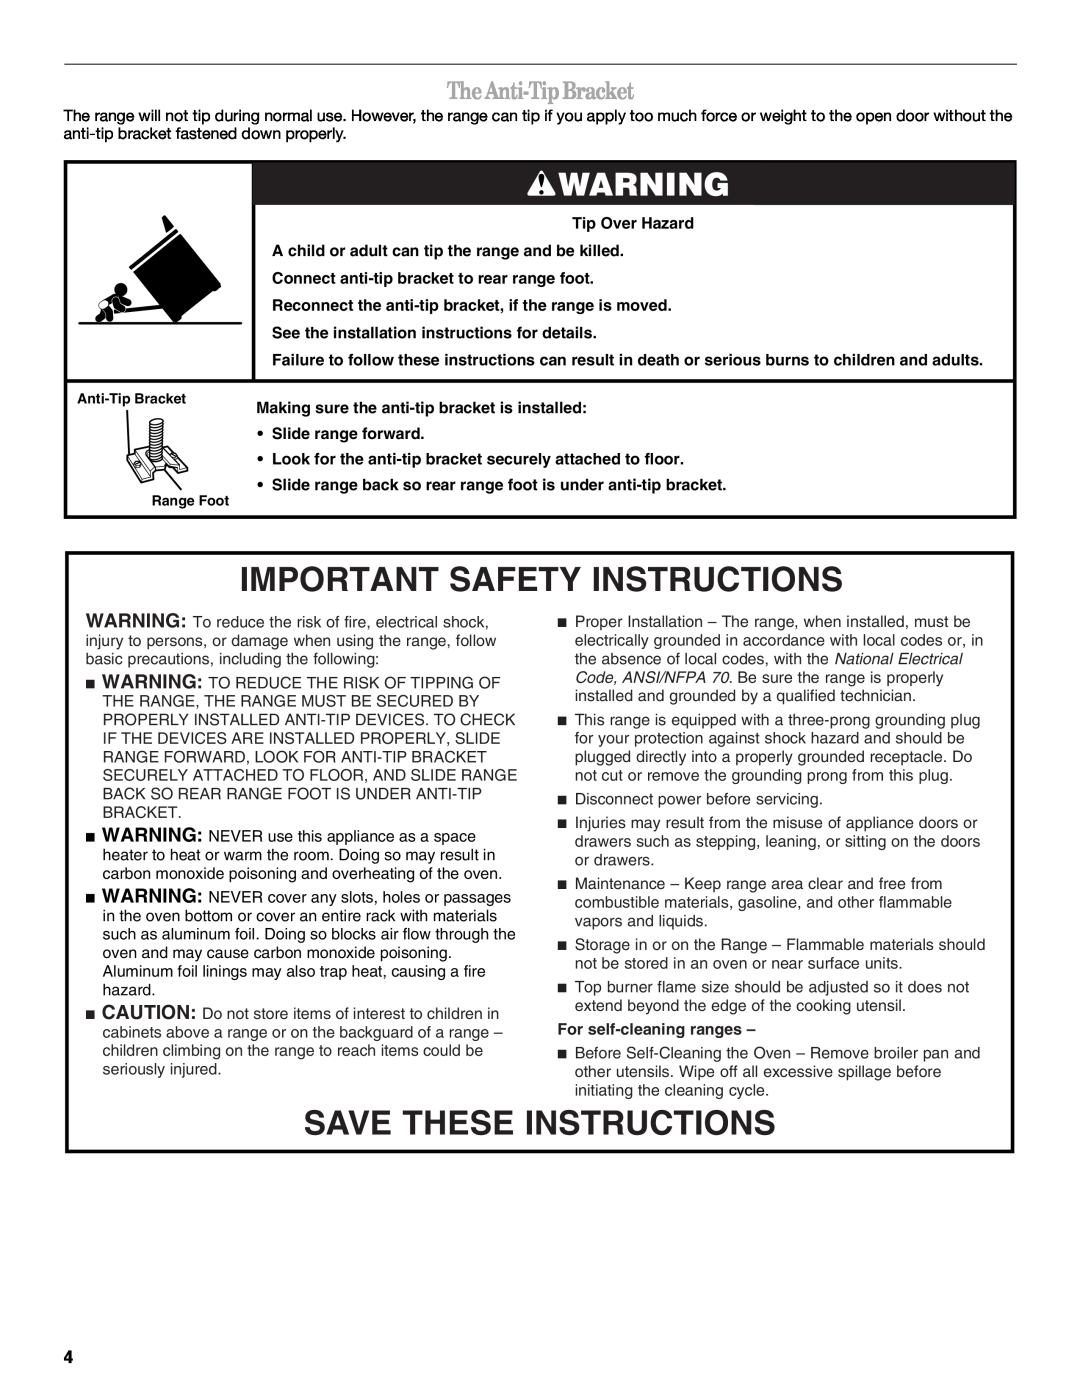 Whirlpool W10110369 The Anti-Tip Bracket, Important Safety Instructions, Save These Instructions, For self-cleaning ranges 